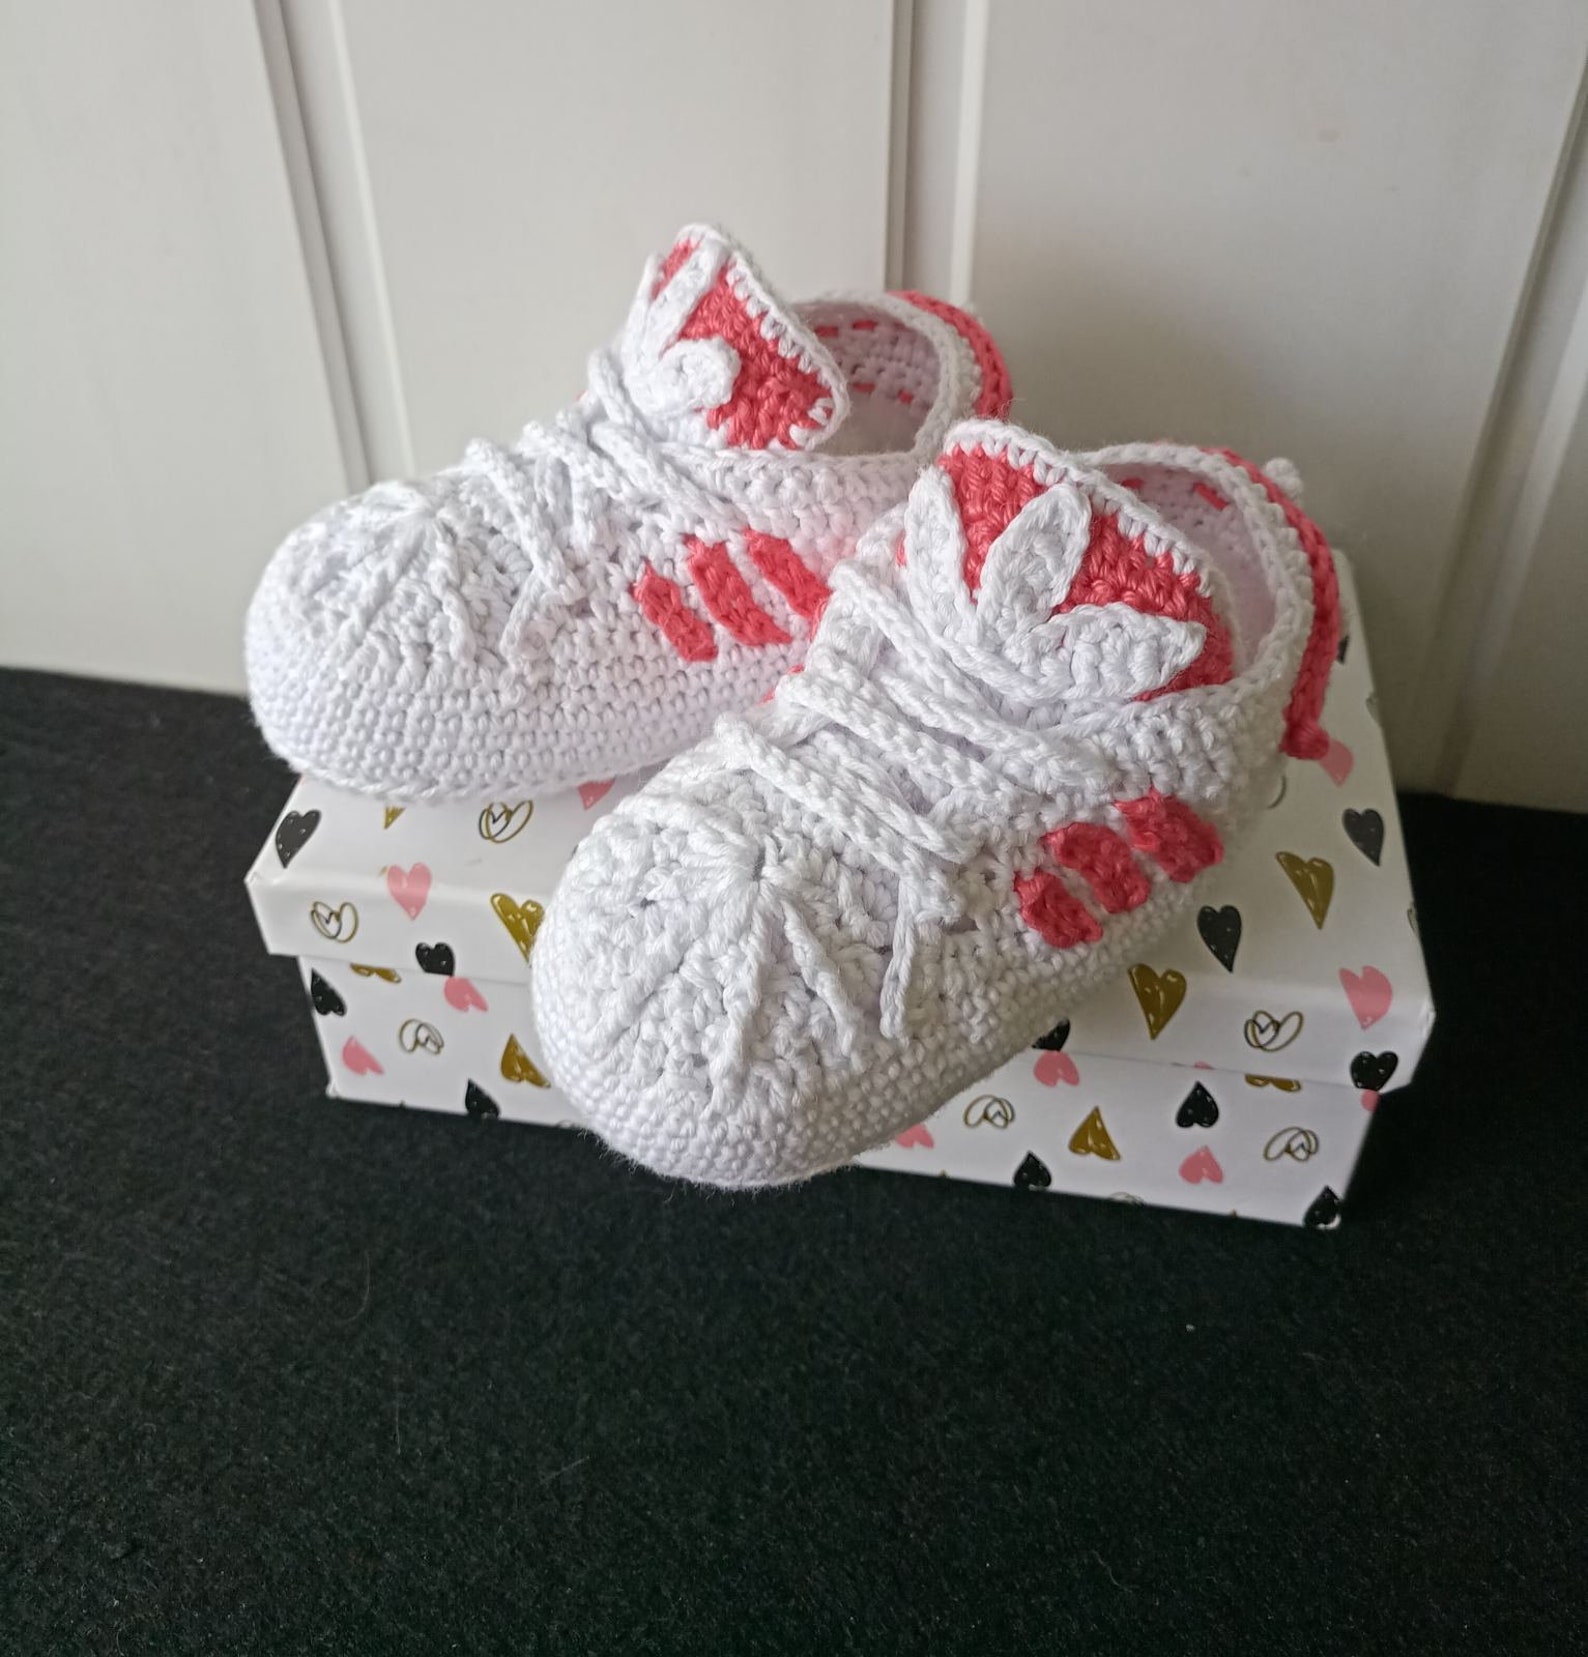 Adidas baby shoes Cotton newborn shoes Baby photo prop | Etsy